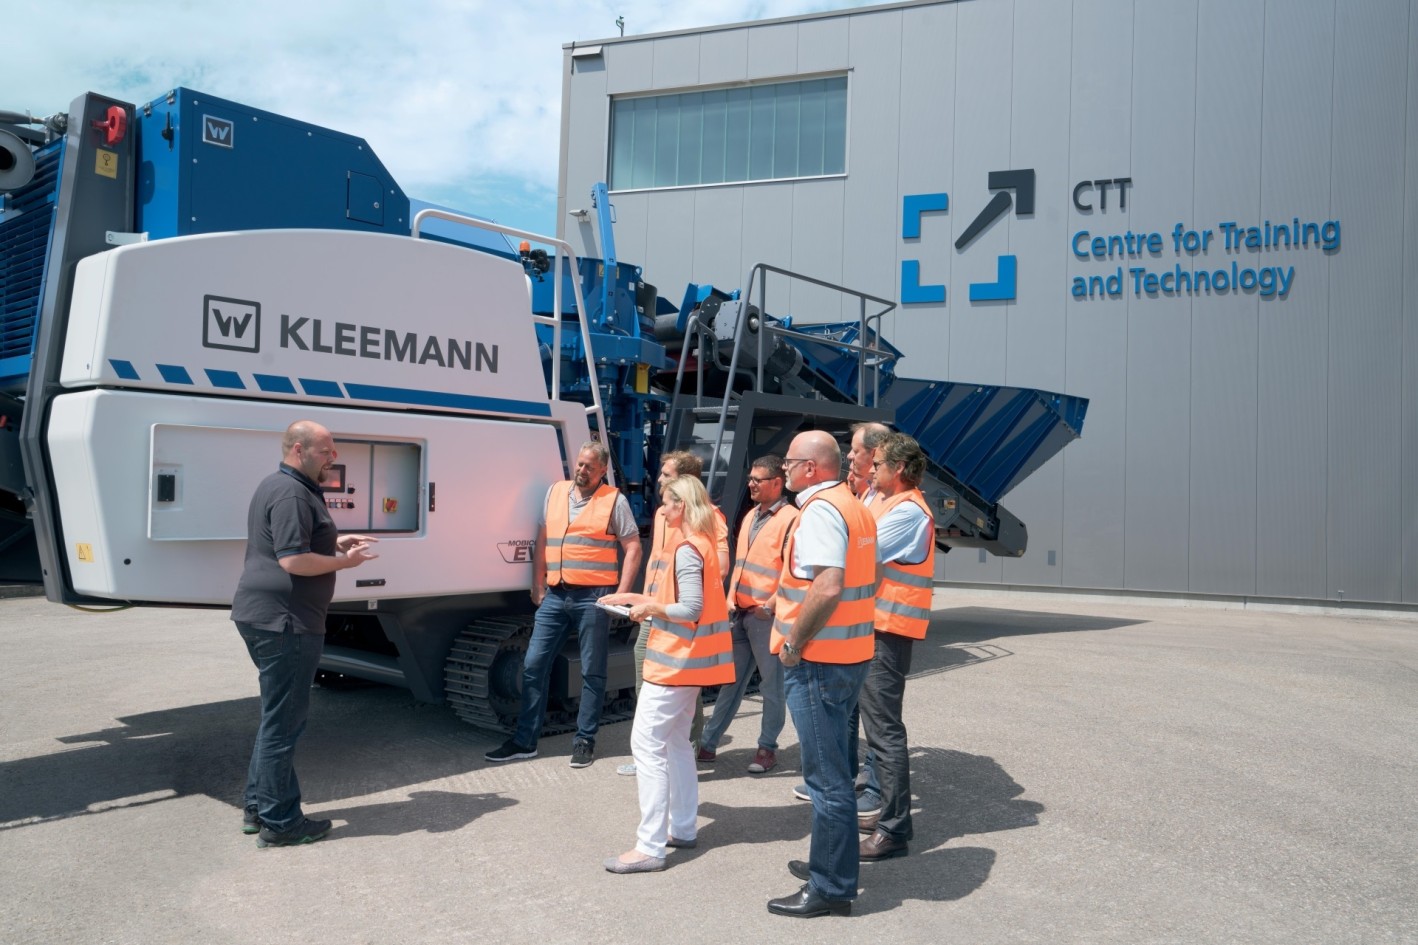 Training group with safety vests in front of Kleemann machine